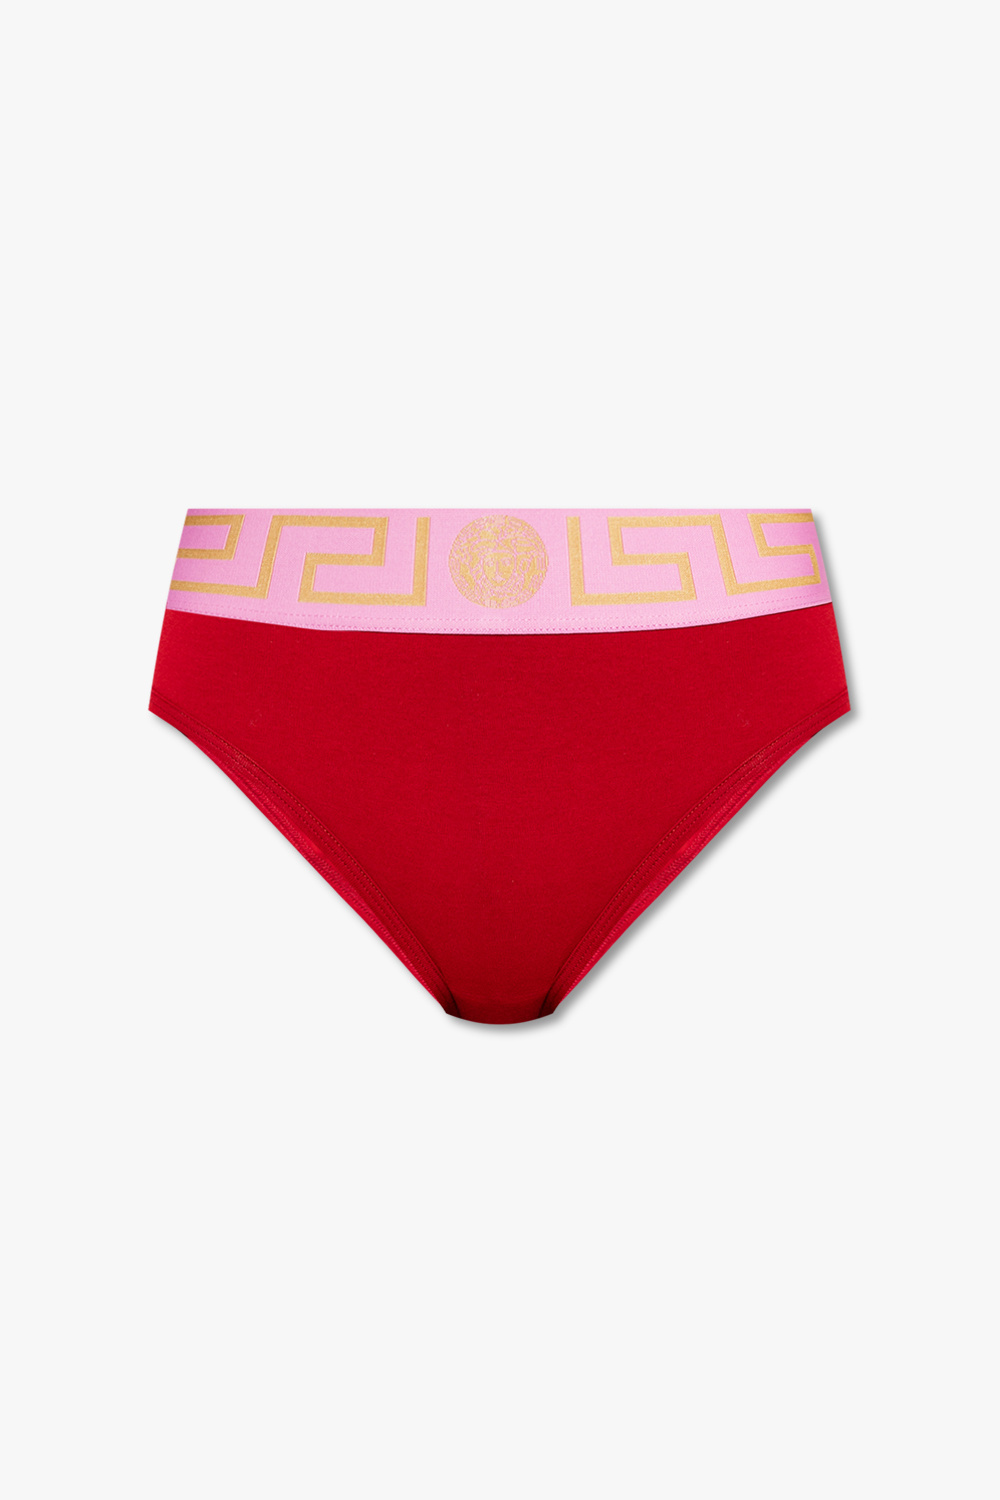 Versace thongs white color